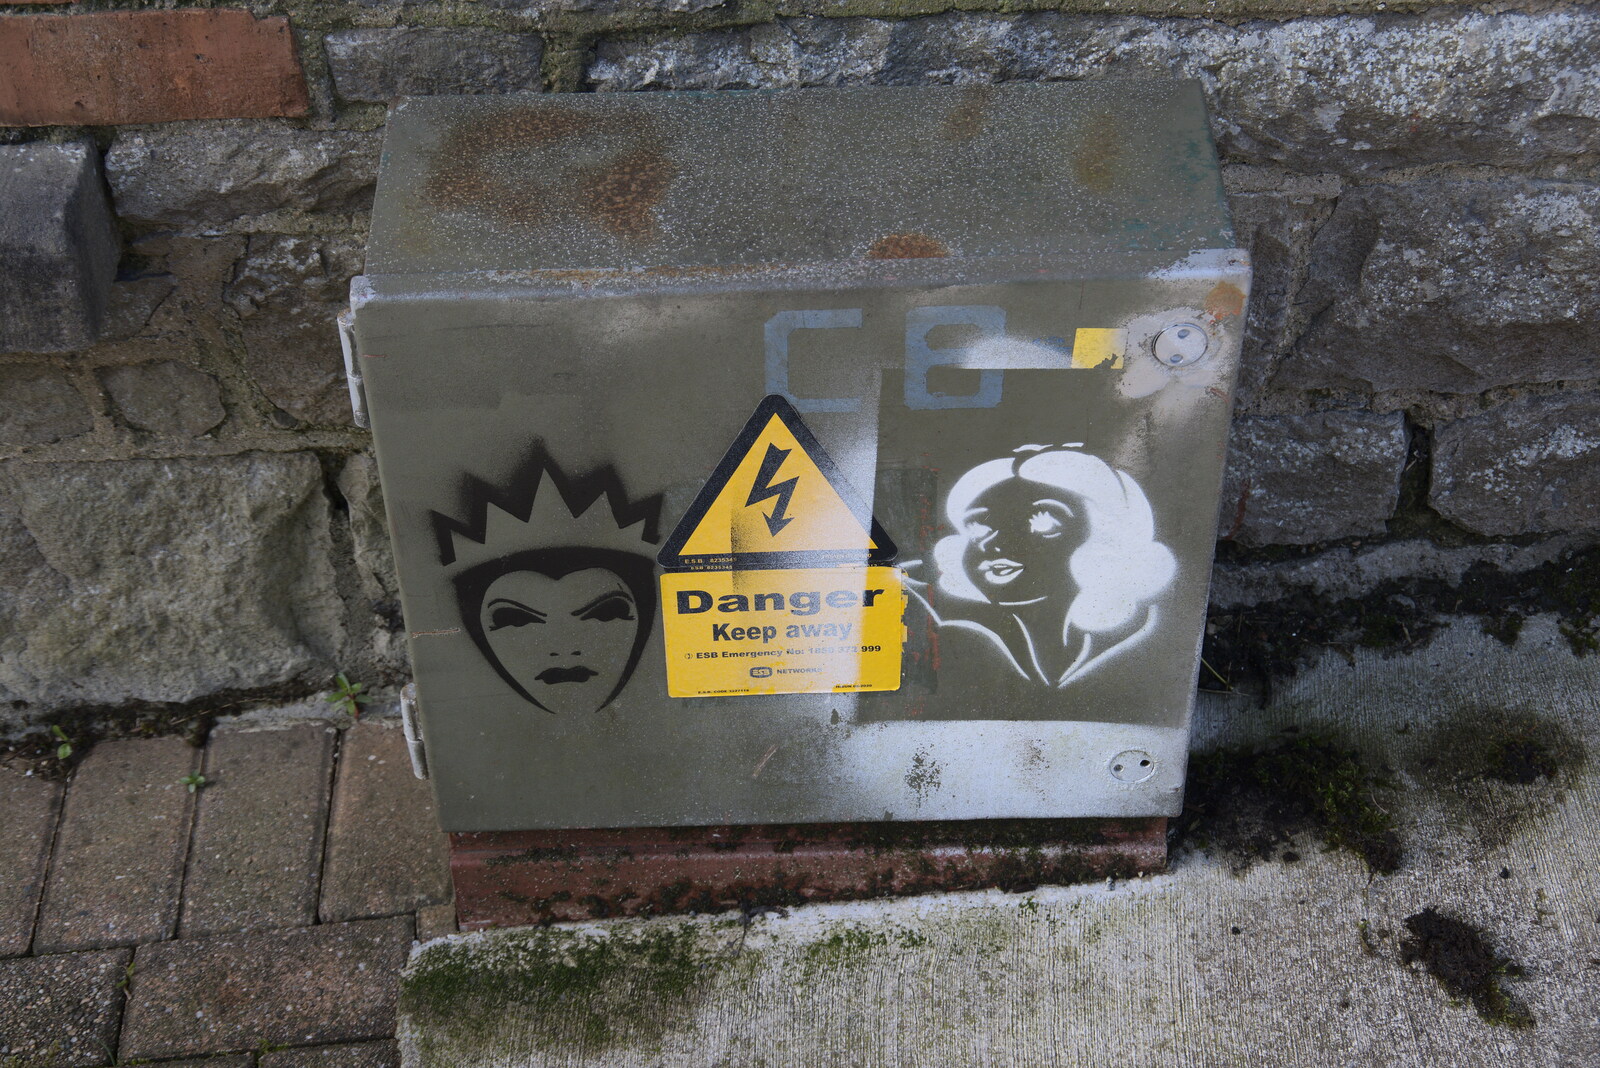 Stencil art on an electrical cabinet from Manorhamilton and Bundoran, Leitrim and Donegal, Ireland - 16th April 2022